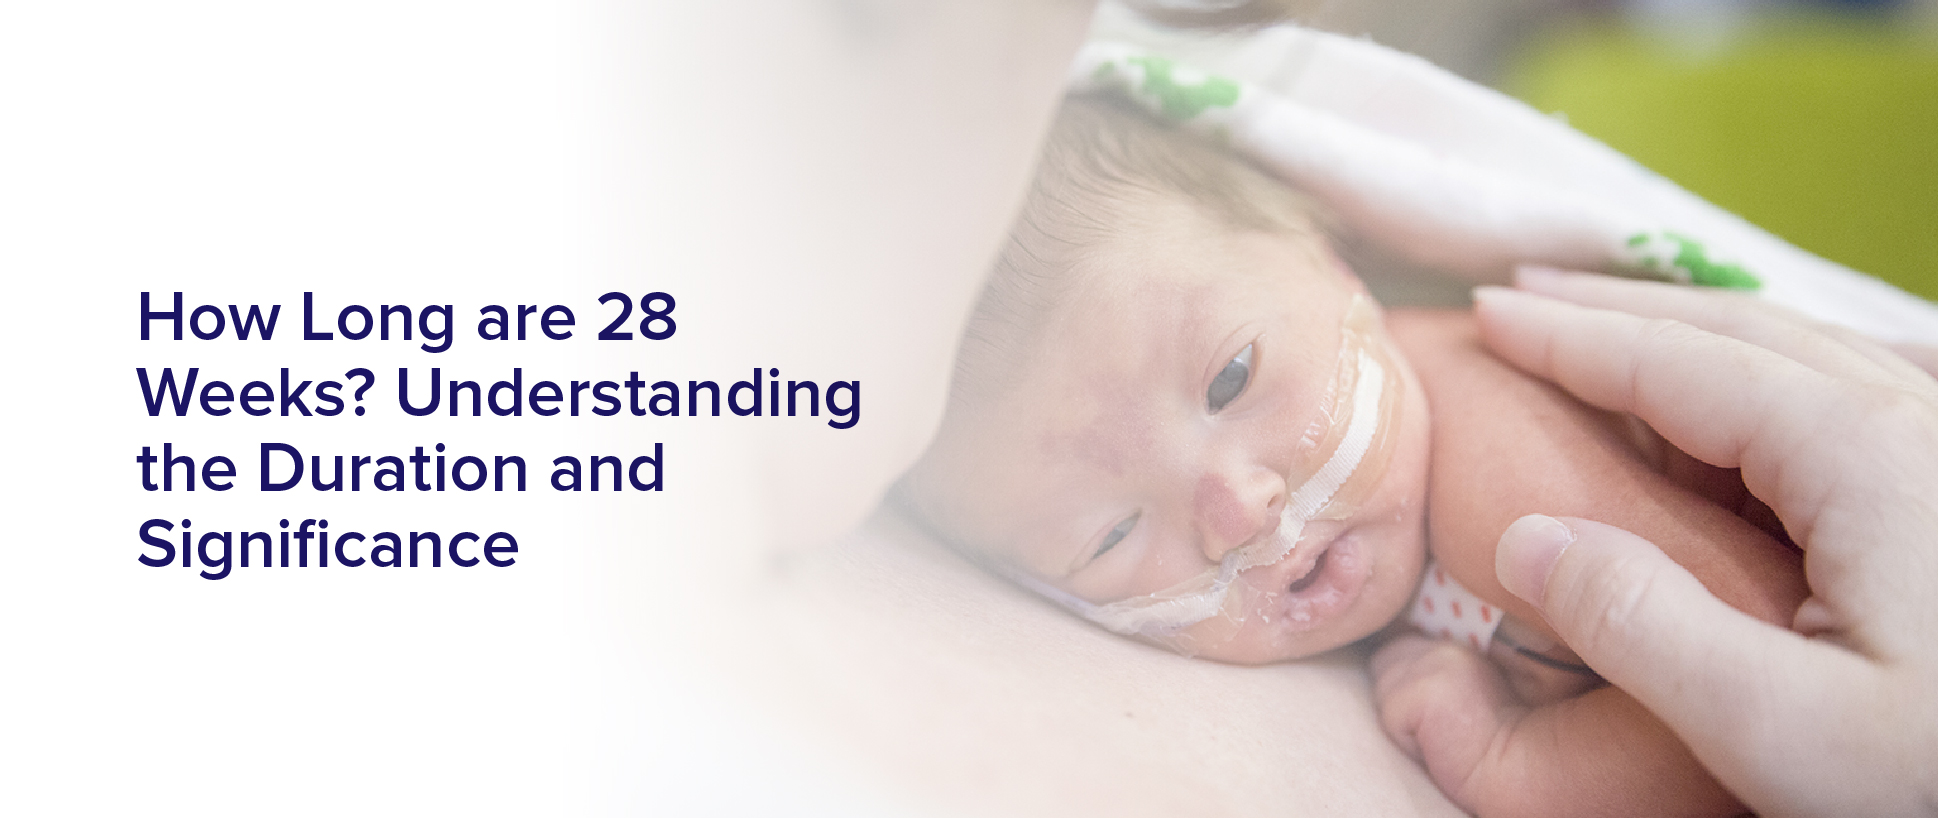 How Long are 28 Weeks? Understanding the Duration and Significance